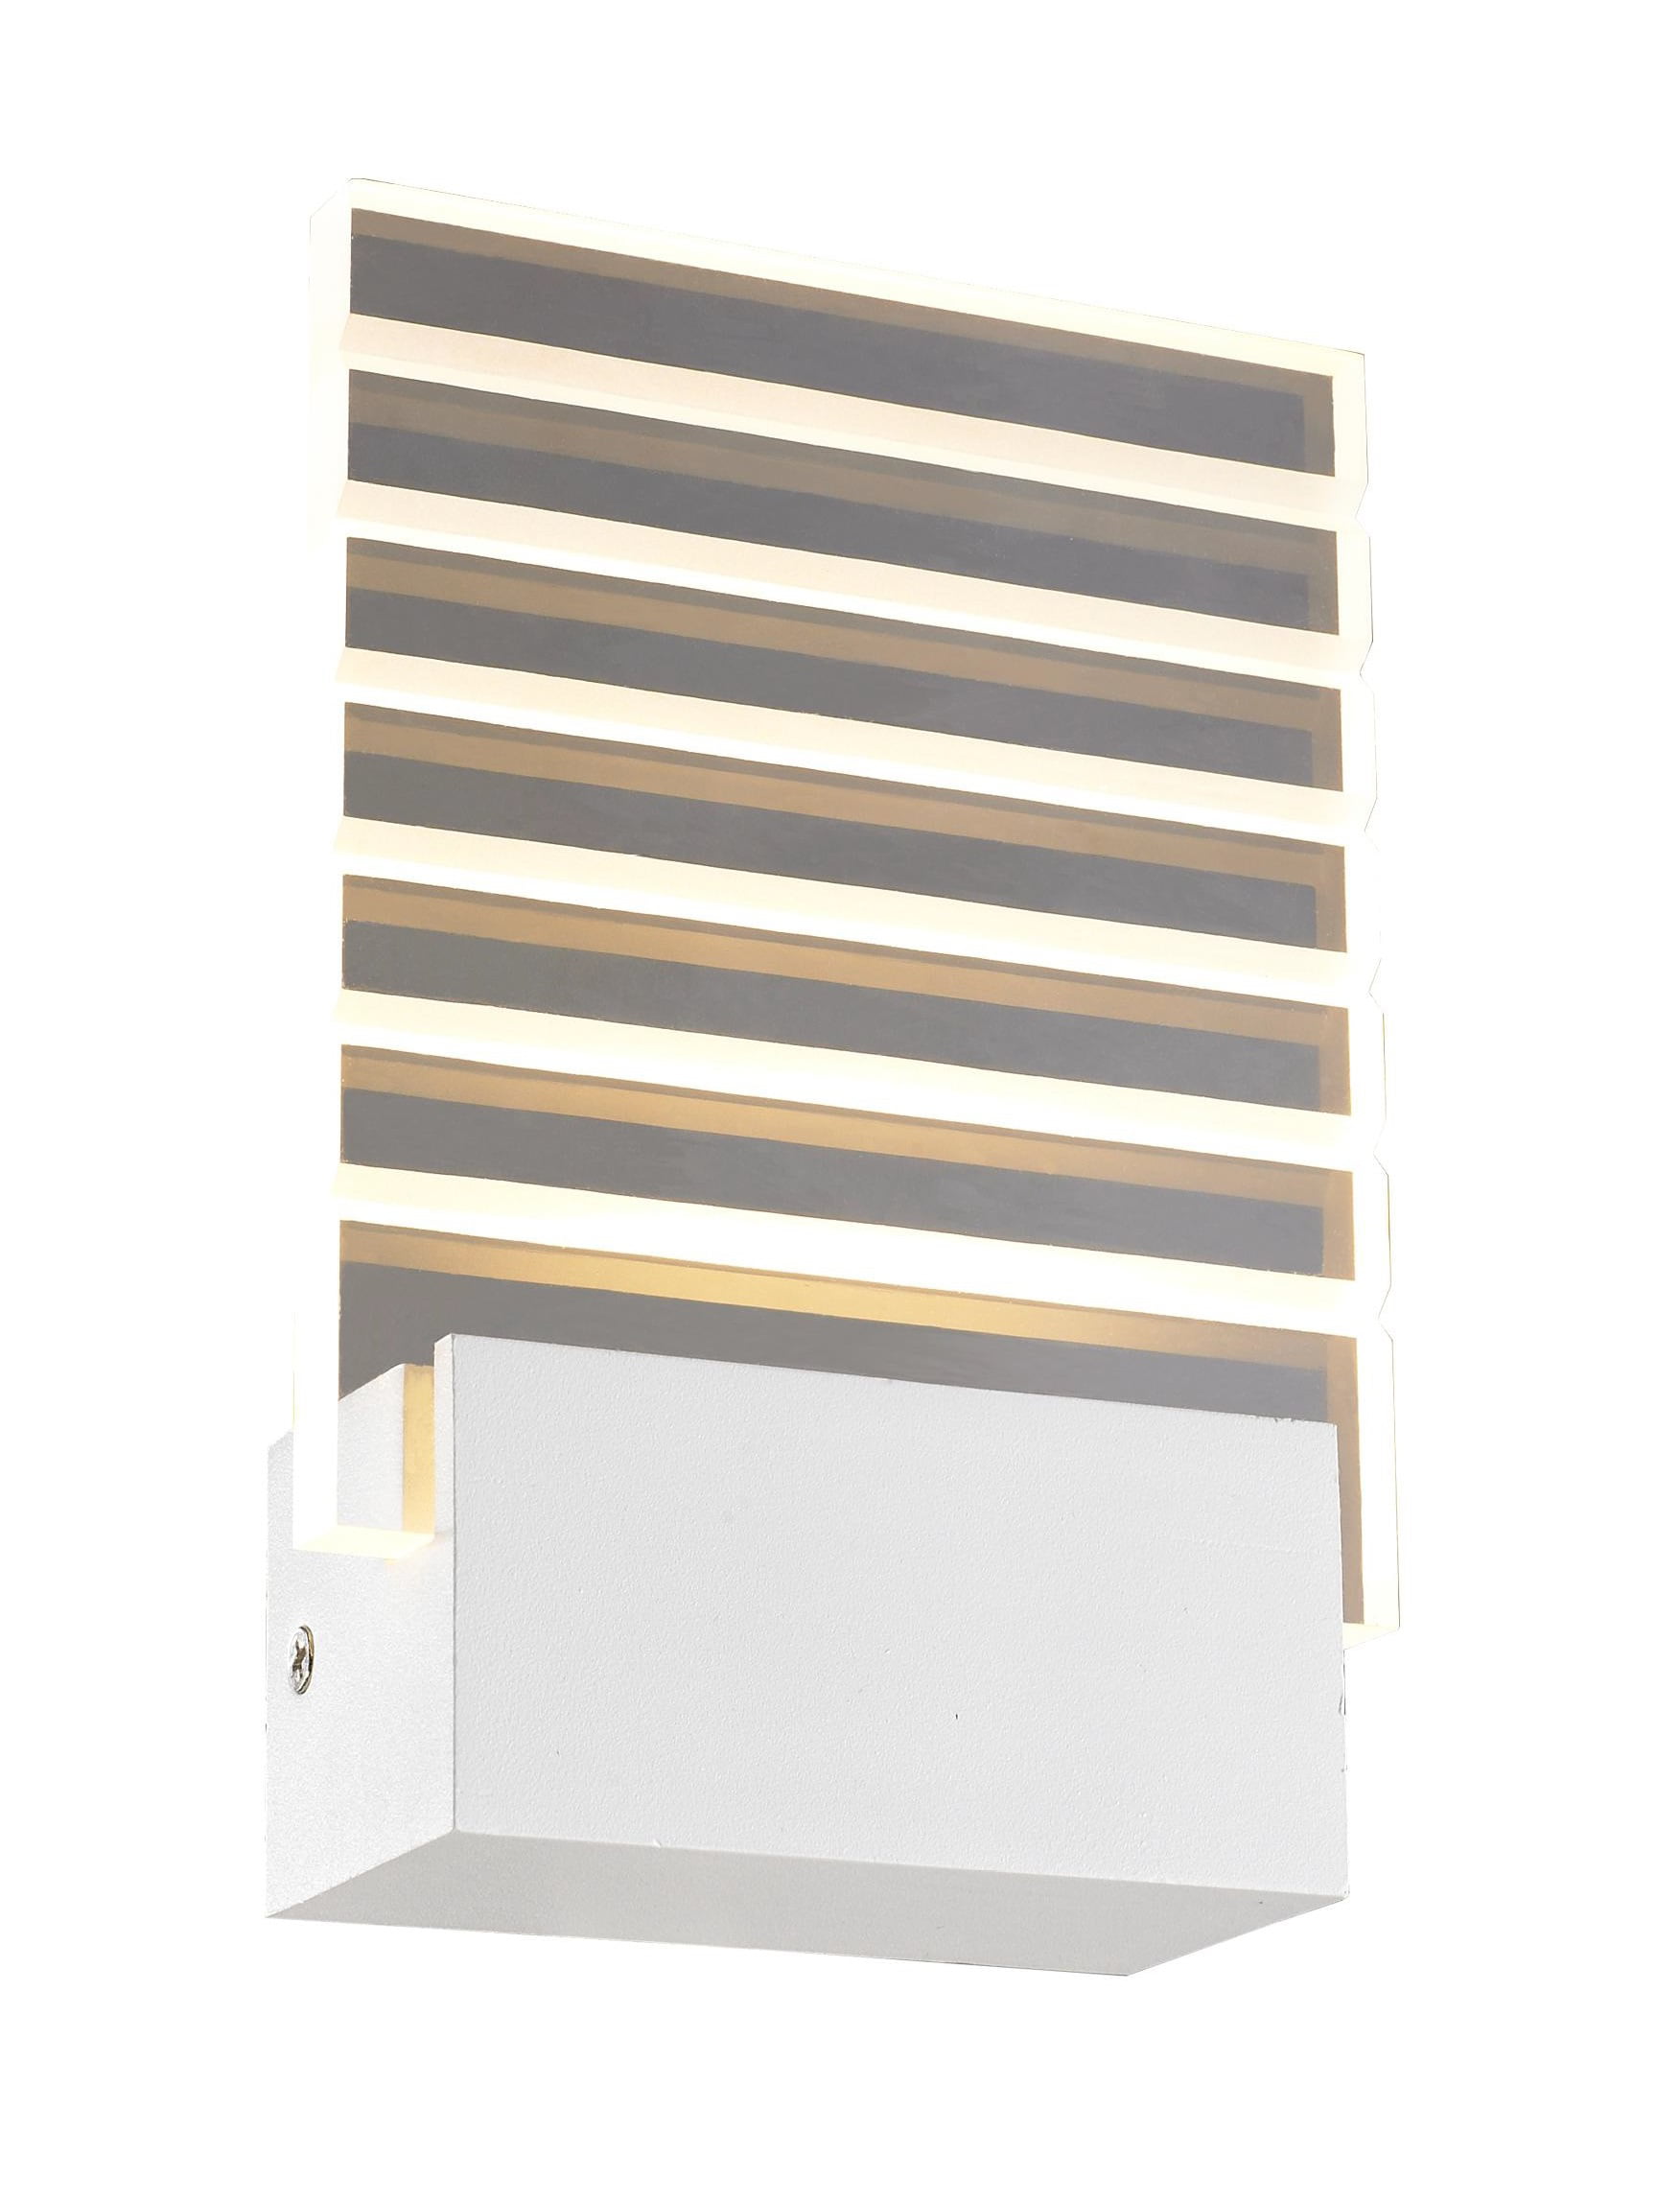 iLett 6 Watts Acrylic Wall Sconce LED Light, Sculpted Lines Design, Modern and Architectural Fixture, Instant on, 480lm, 5000K - 5200K (Cool White),100V-277V